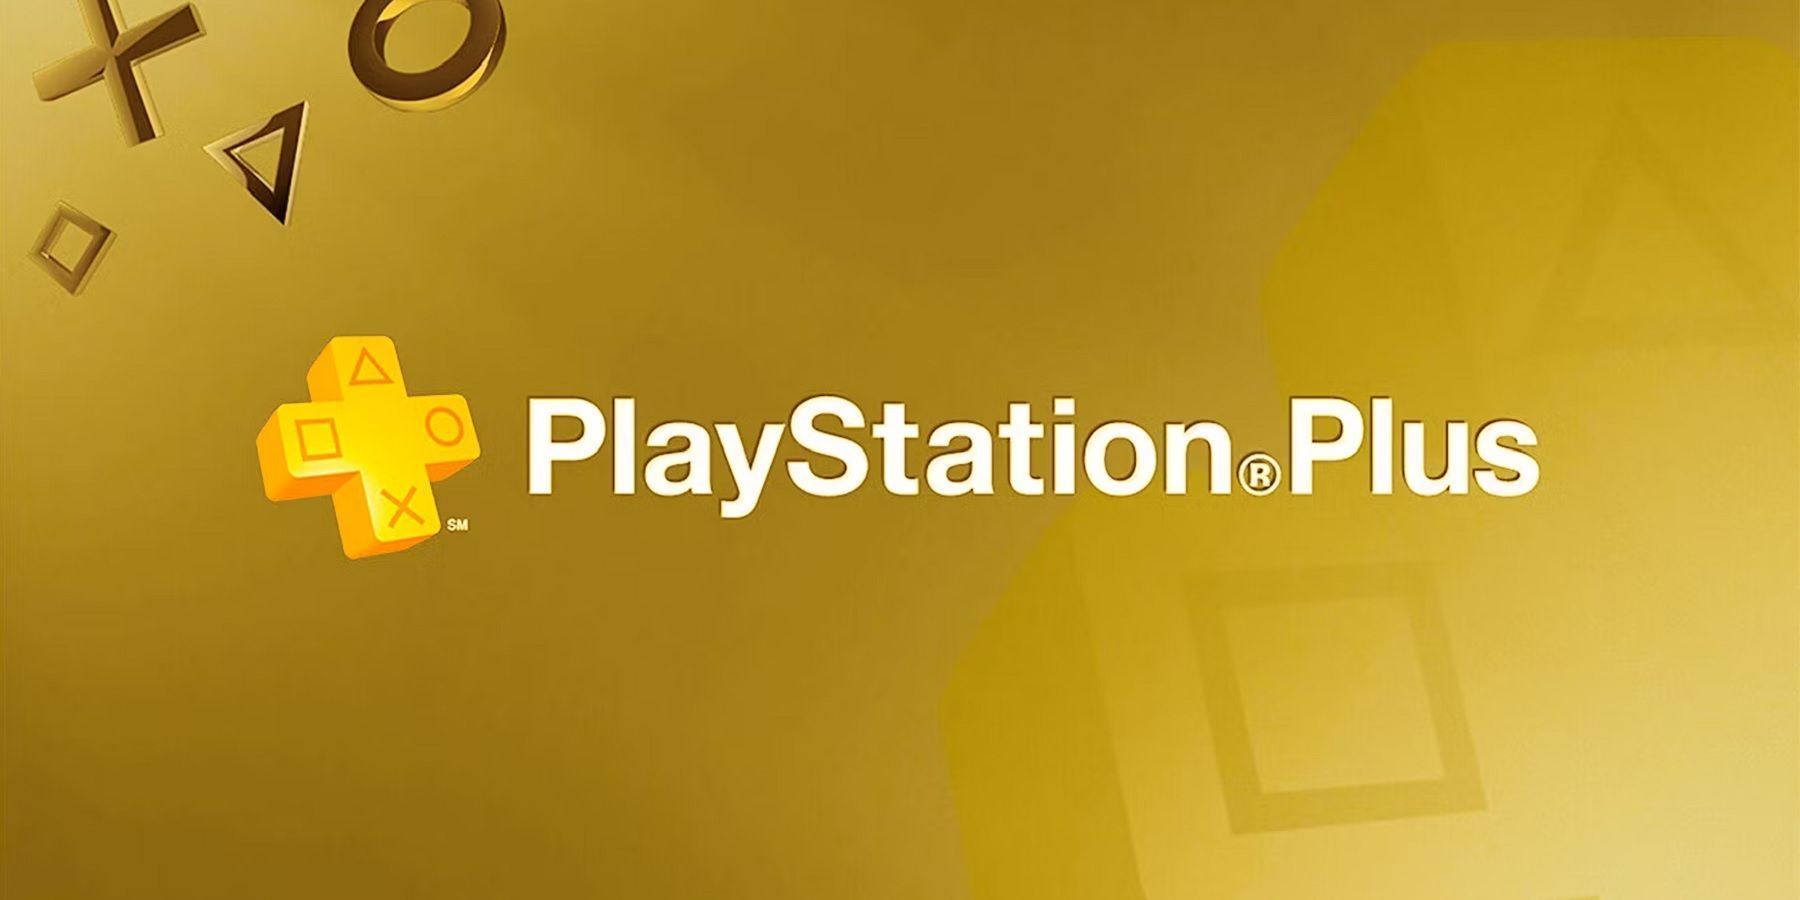 Free PlayStation Plus games for June 2023